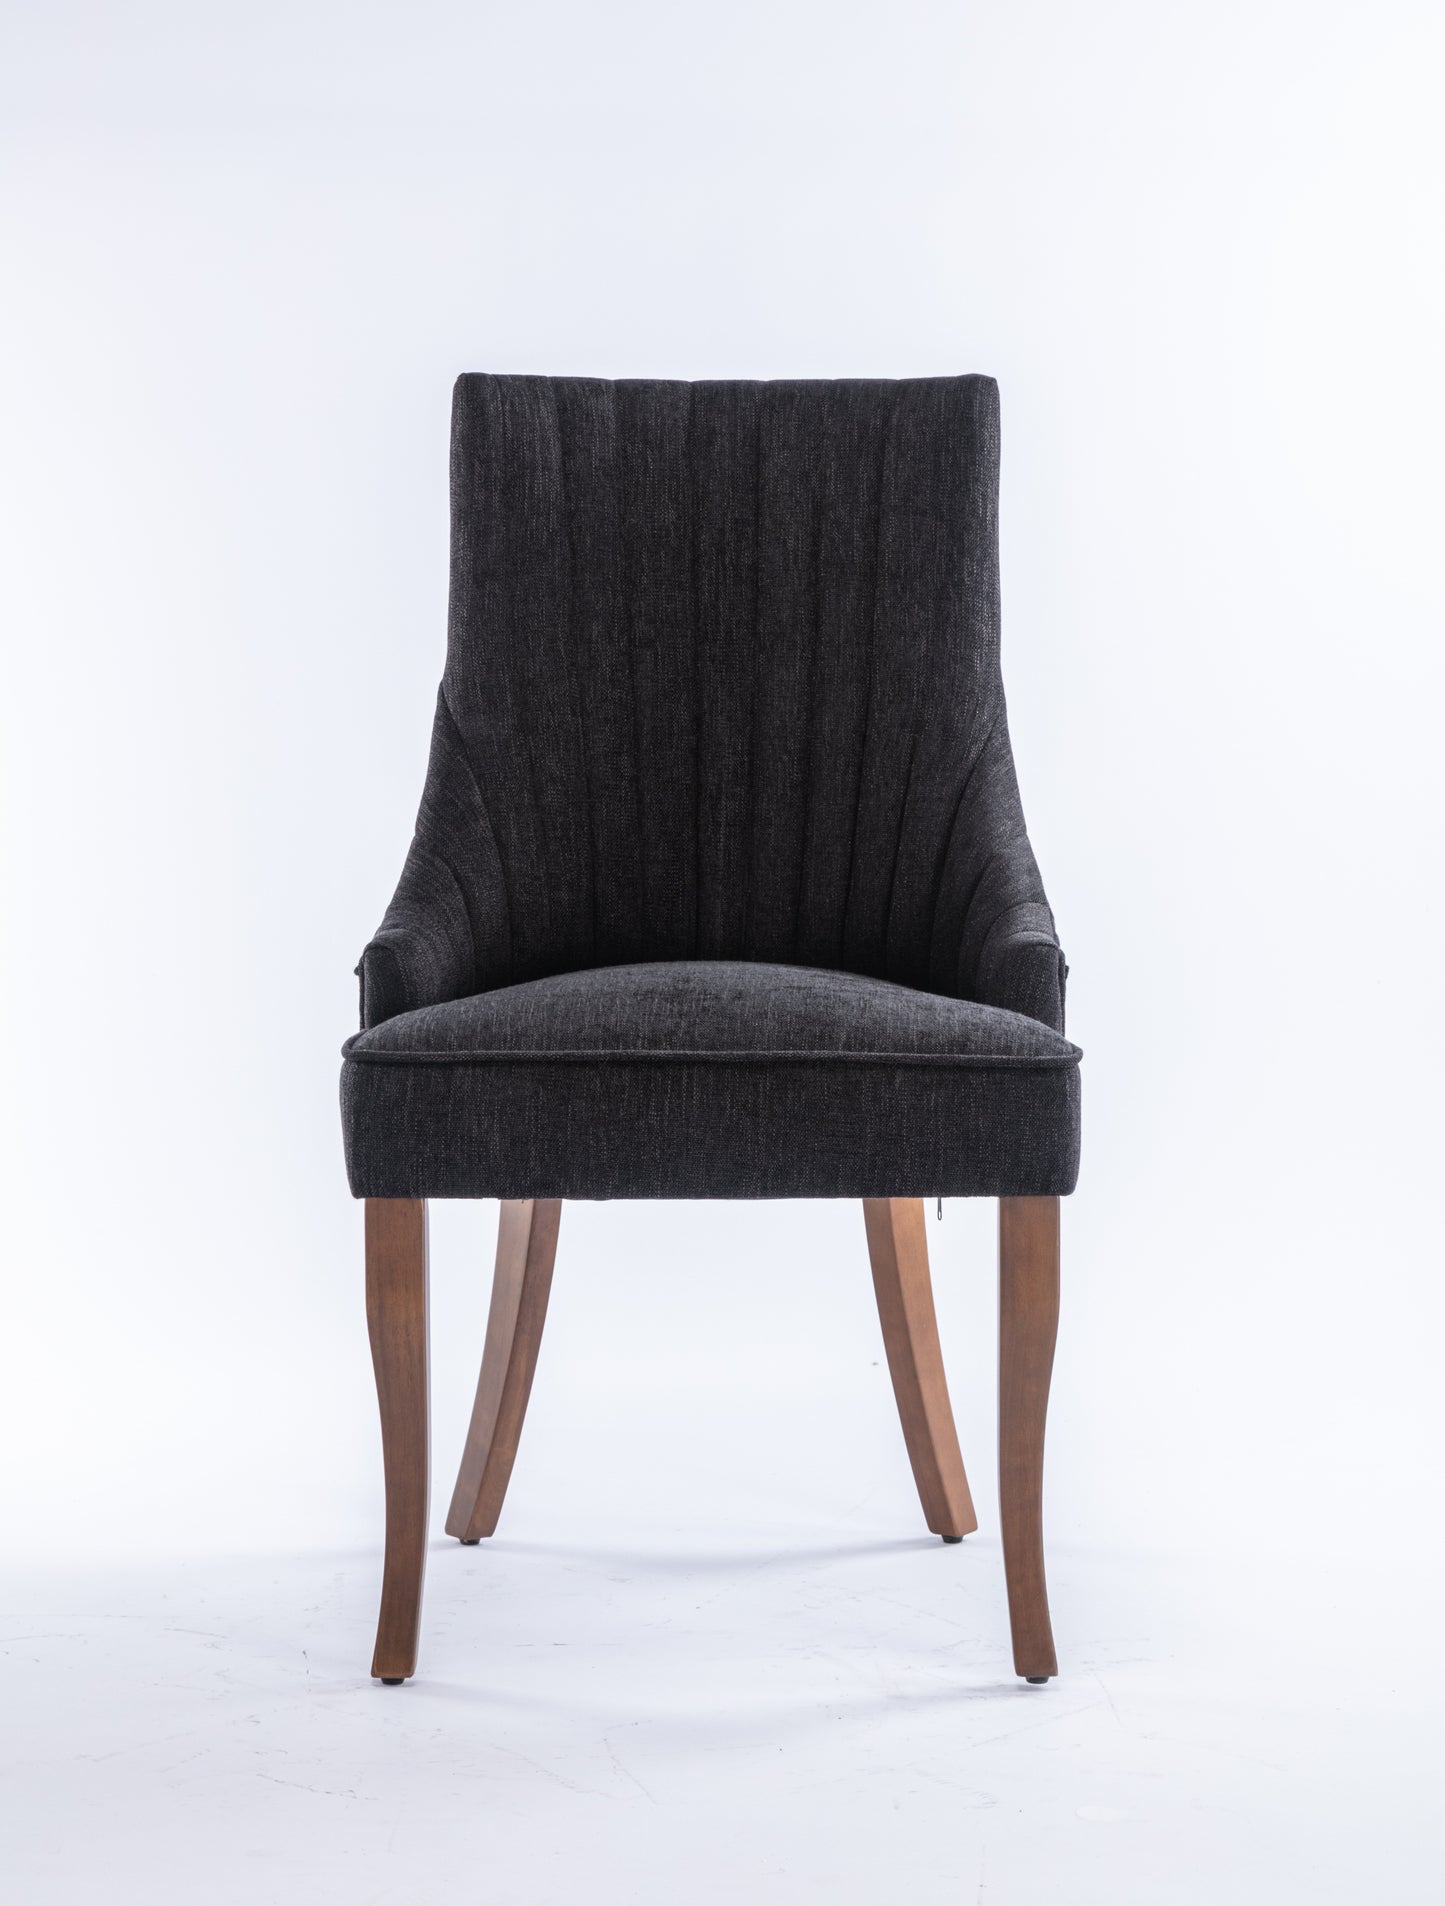 Exquisite Black Linen Fabric Upholstered Strip Back Dining Chair with Solid Wood Legs 2 Pcs